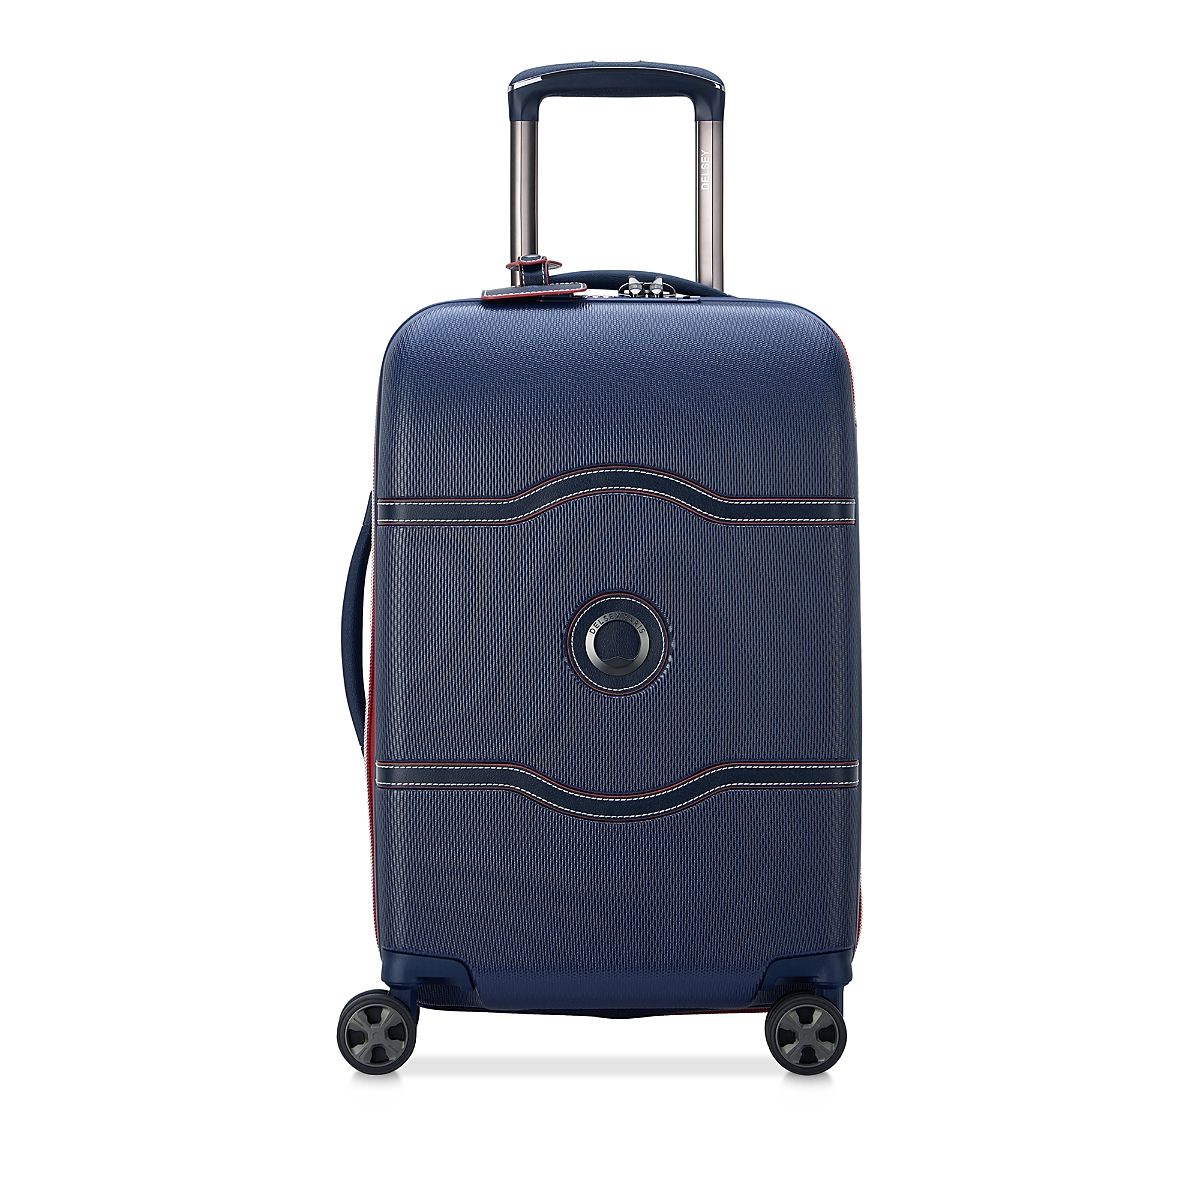 <p><strong>$299.99</strong></p><p>Polycarbonate with a vegan leather trim, Delsey's Chatelet Air Collection is a sophisticated select. The Dual Density double spinner wheels are extra quiet, and the patented zipper is three times more resistant than a standard one.</p>